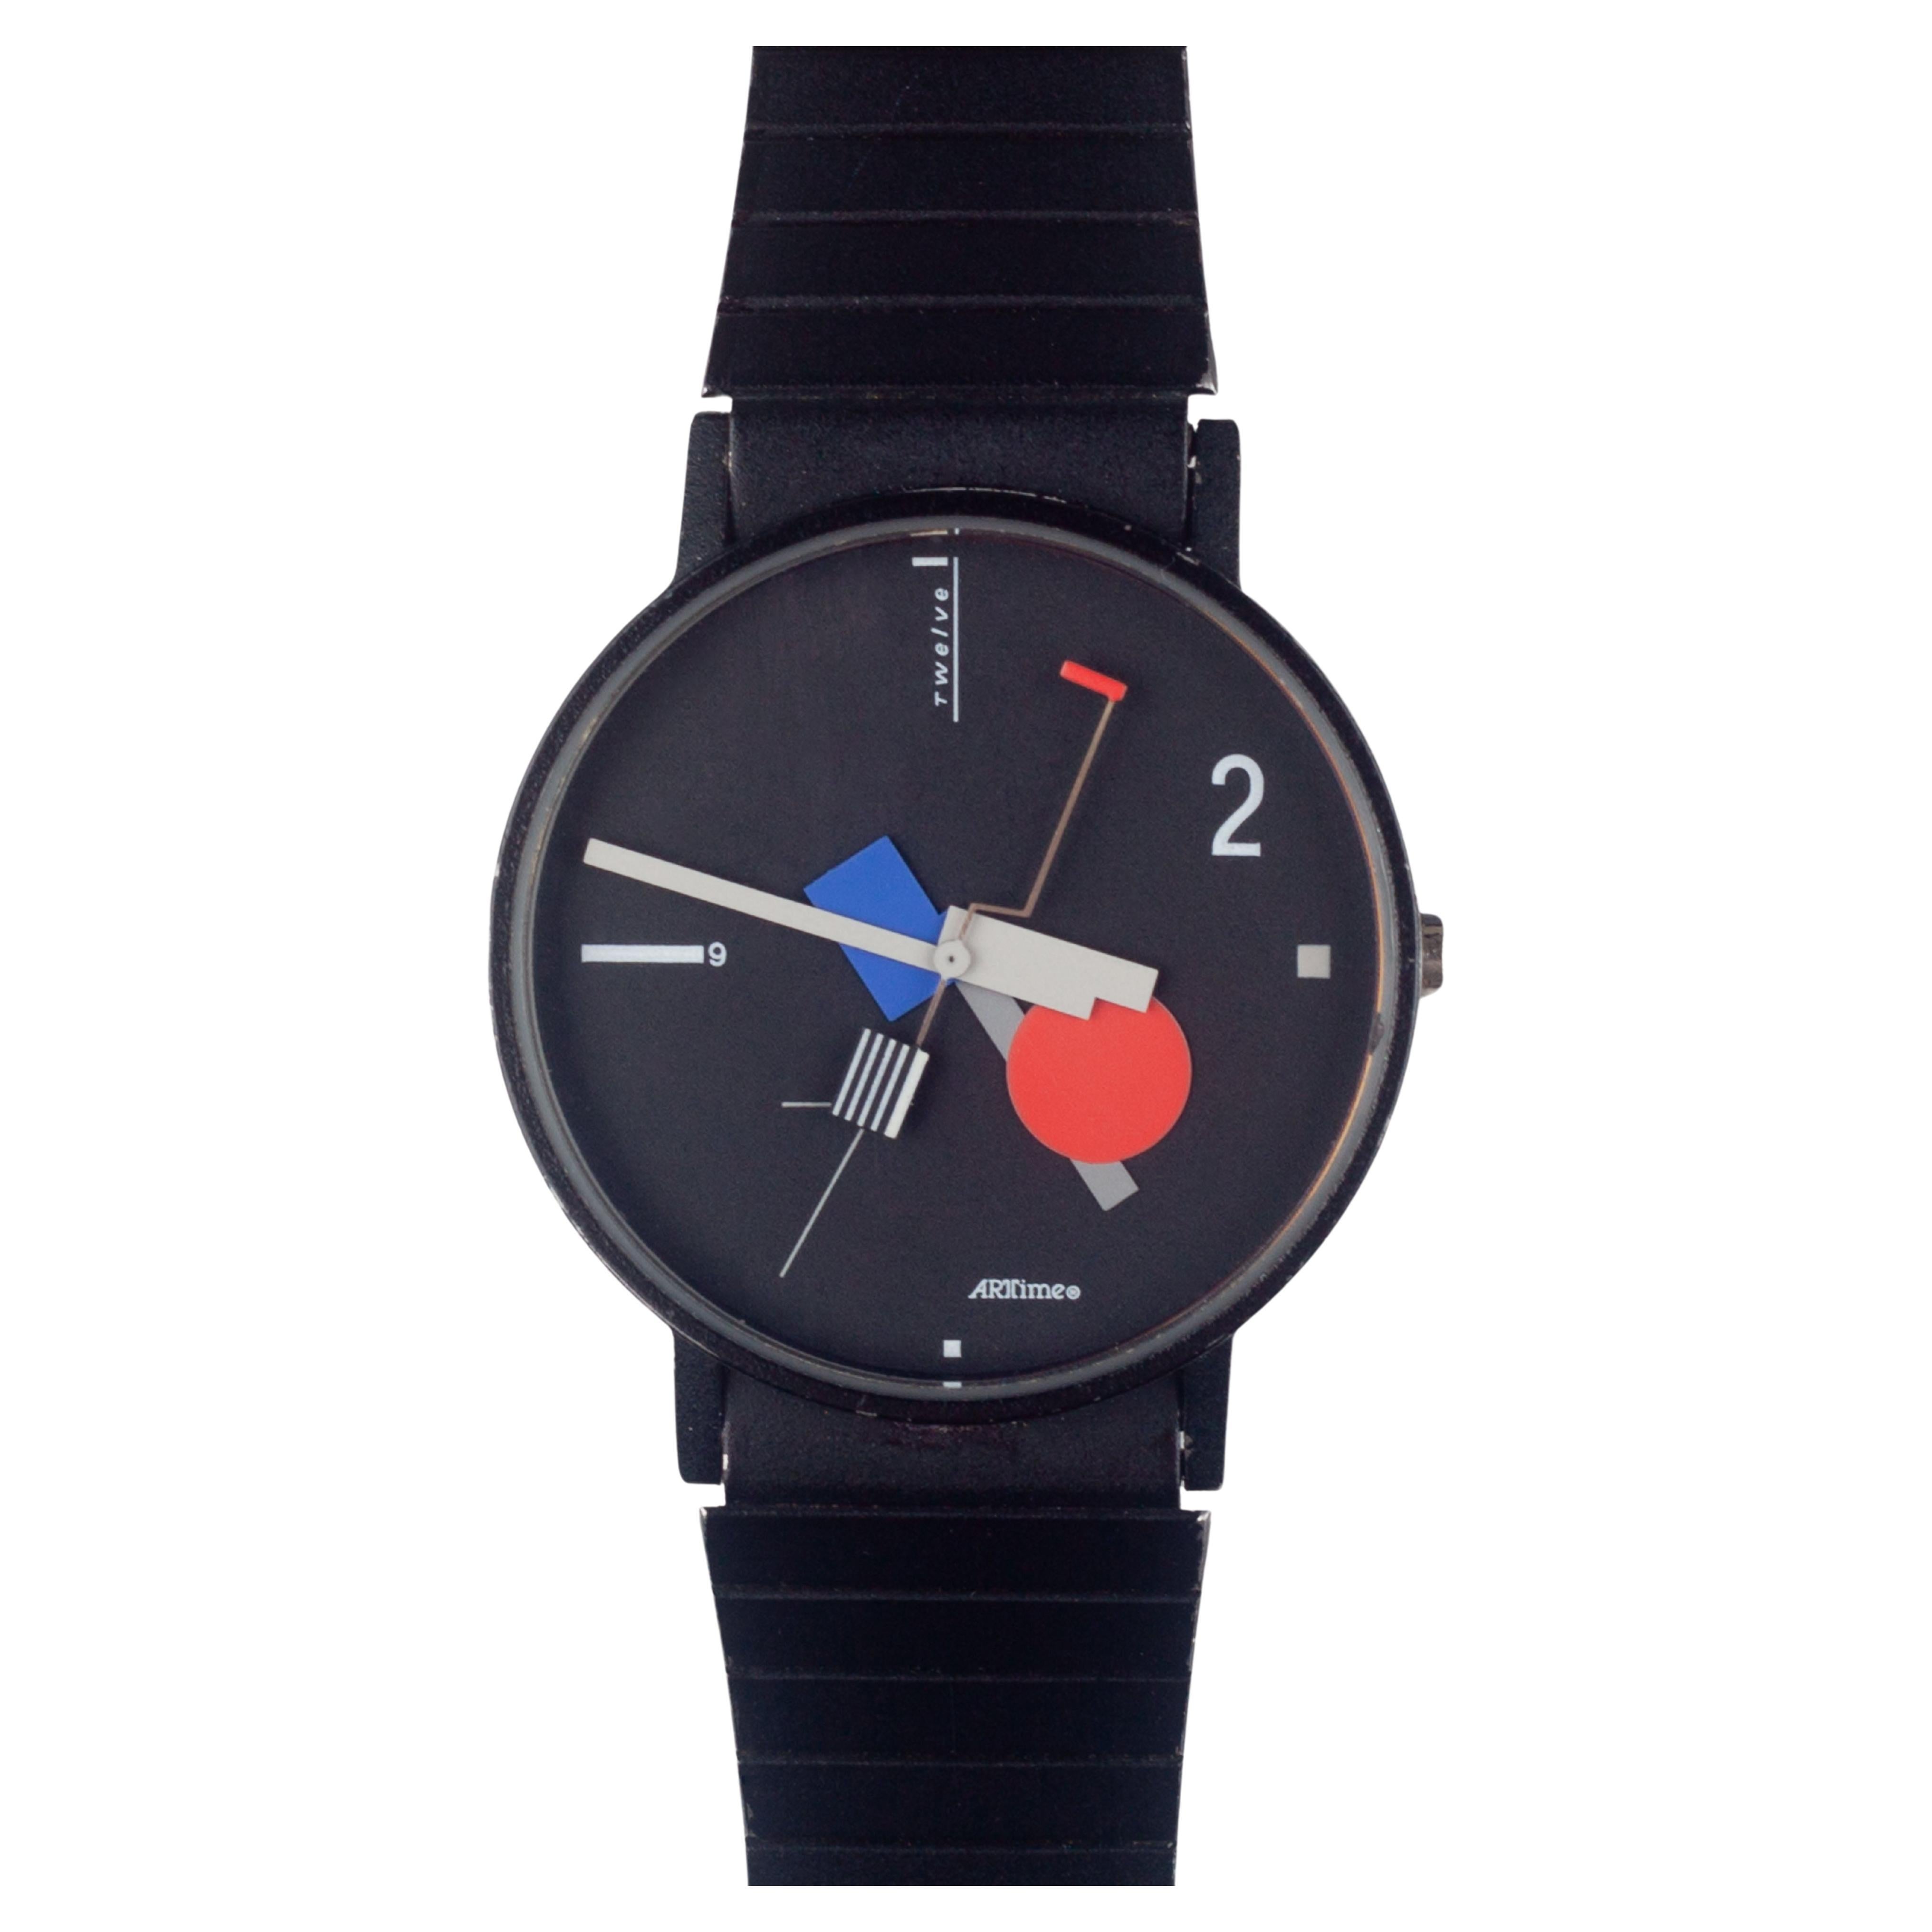 Memphis Postmodern Wristwatch by Nicolai Canetti for Artime, 1986 Swiss made